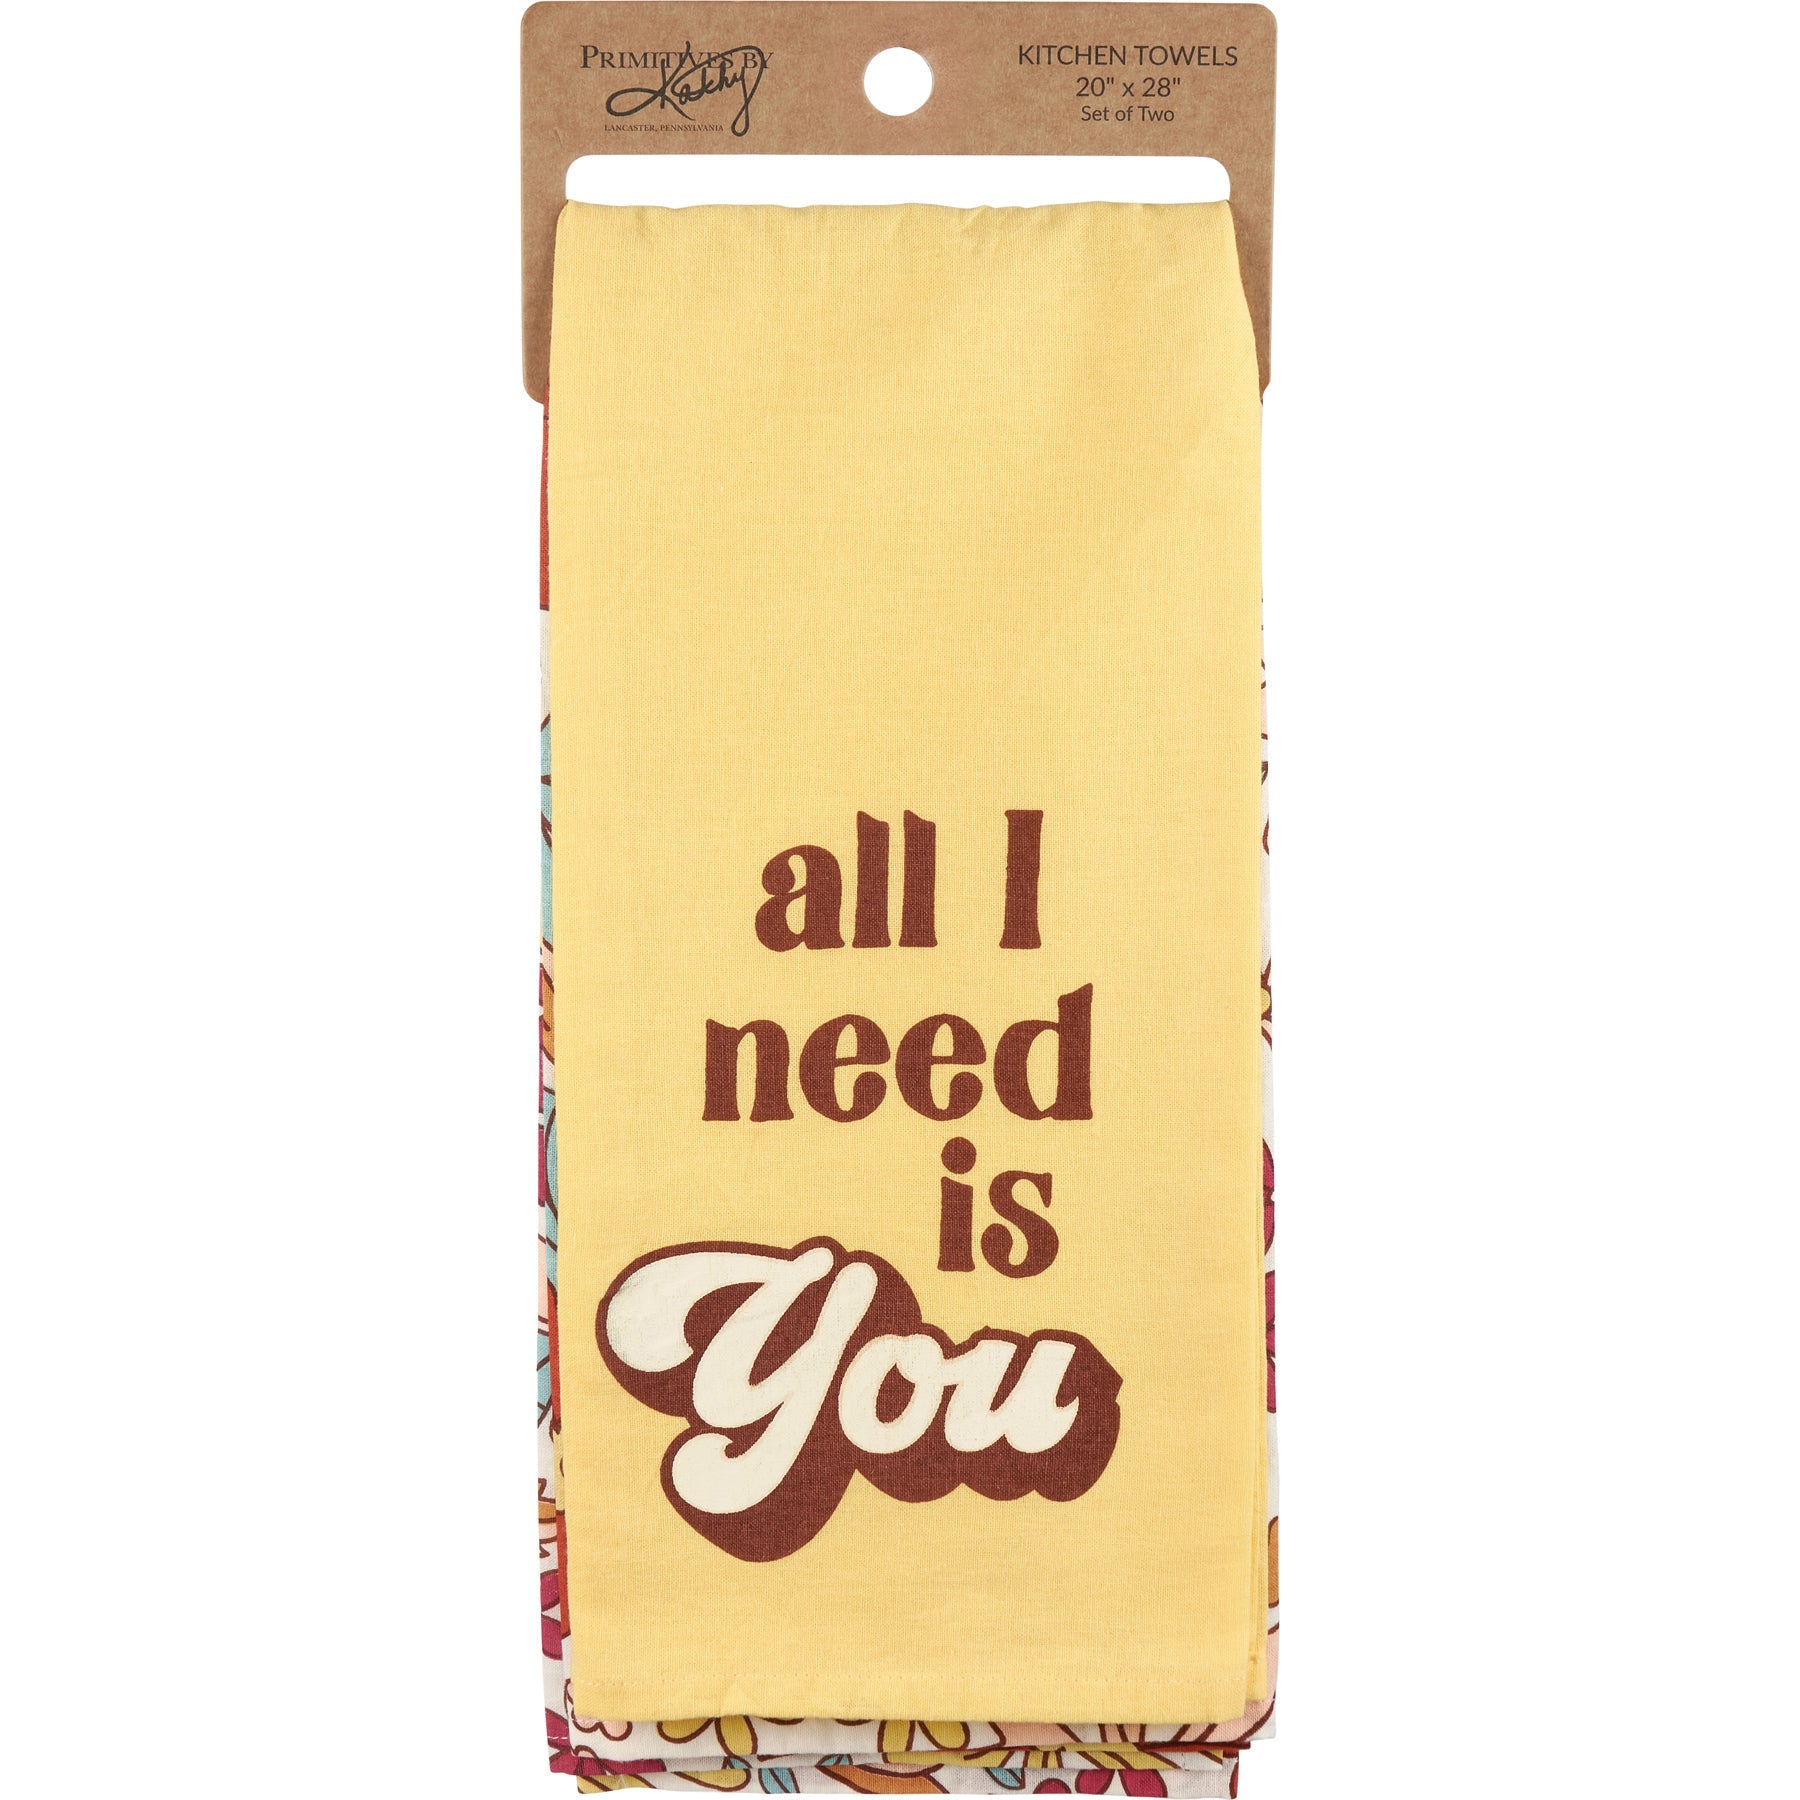 All I Need Is You Groovy Dish Cloth Towel Set | 2 Coordinating Cotton Tea Towels | '70s Retro